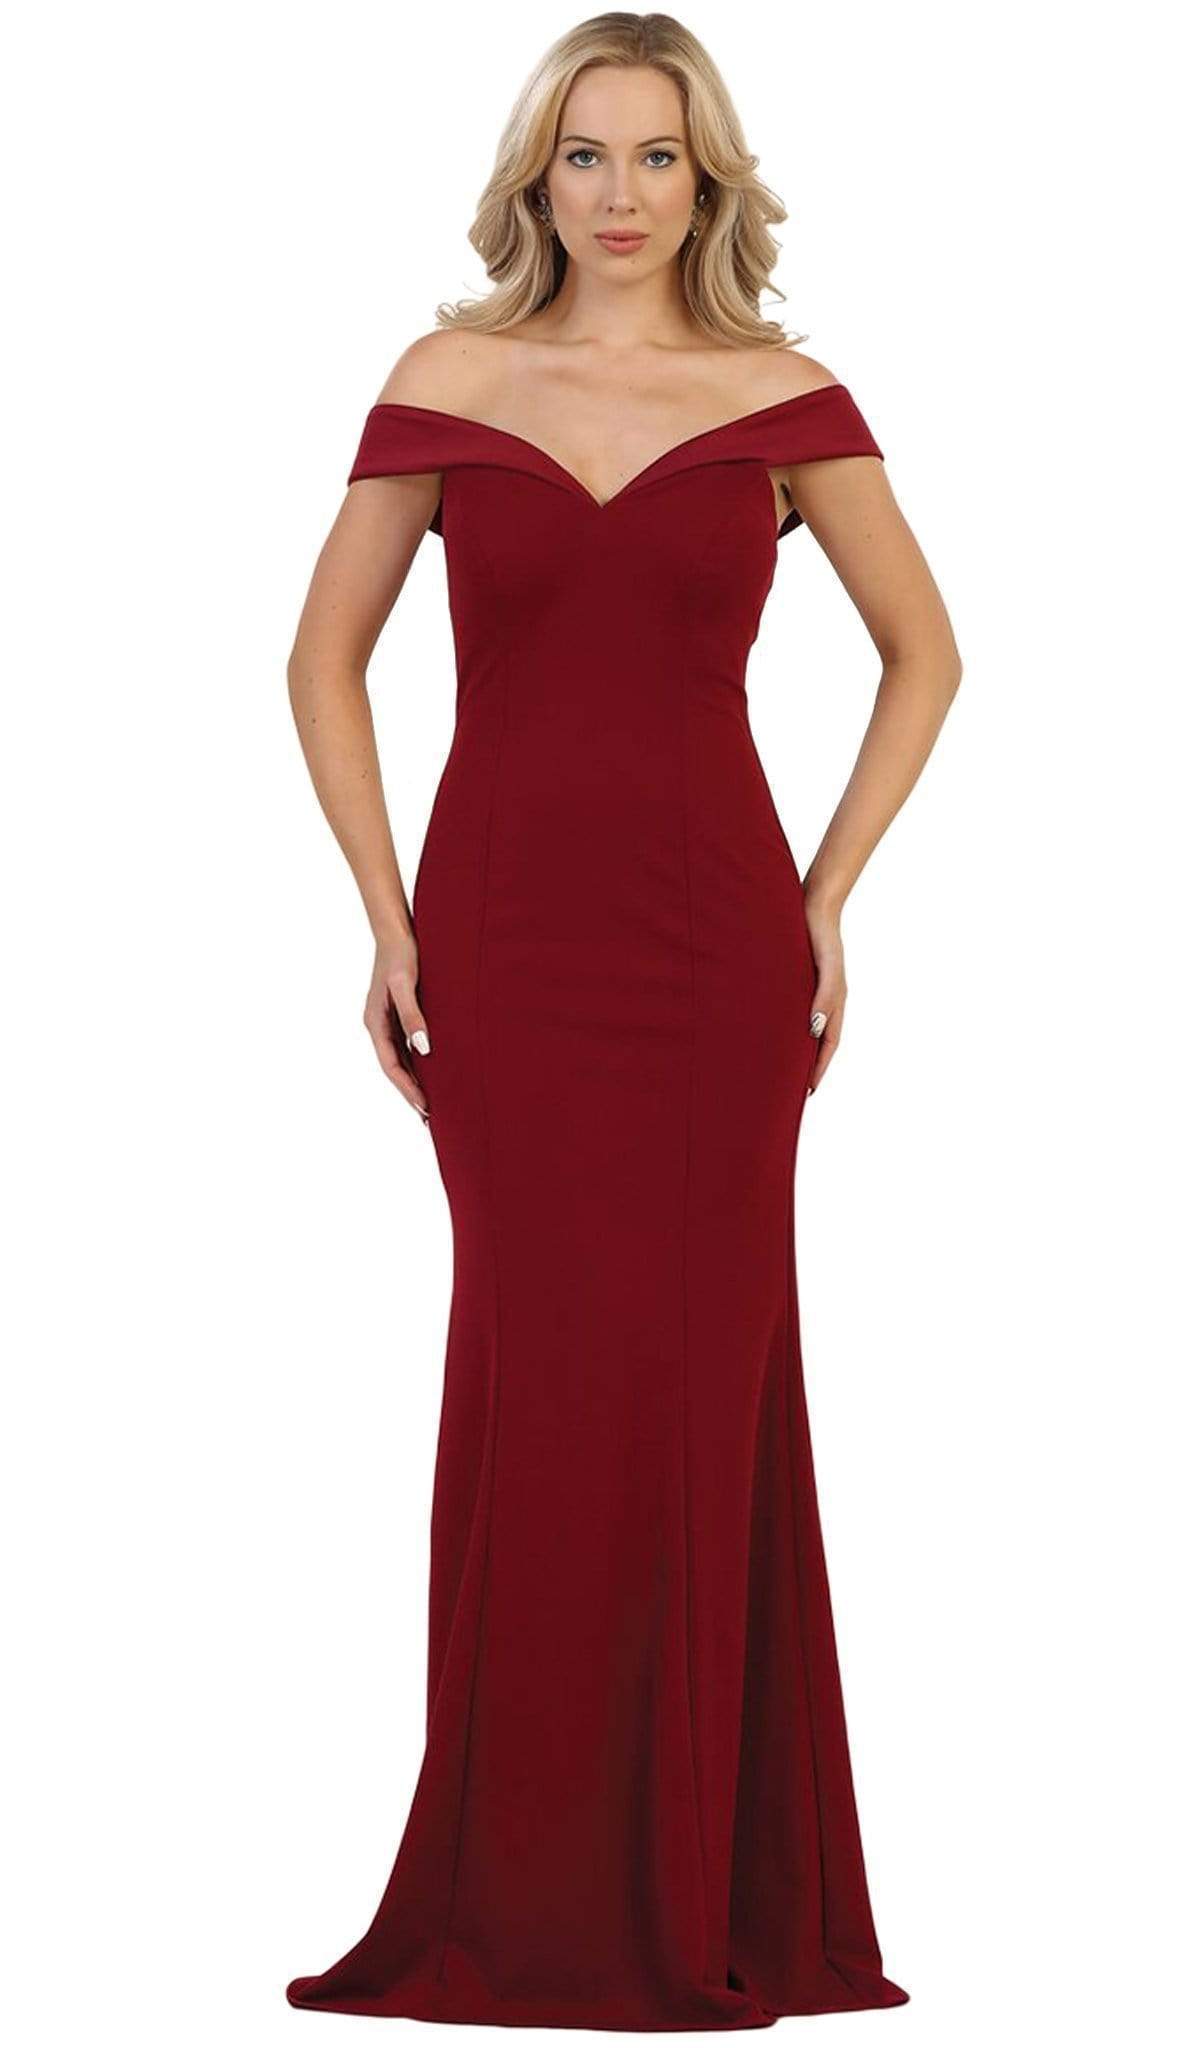 May Queen, May Queen - Fold over Off-Shoulder Sheath Dress